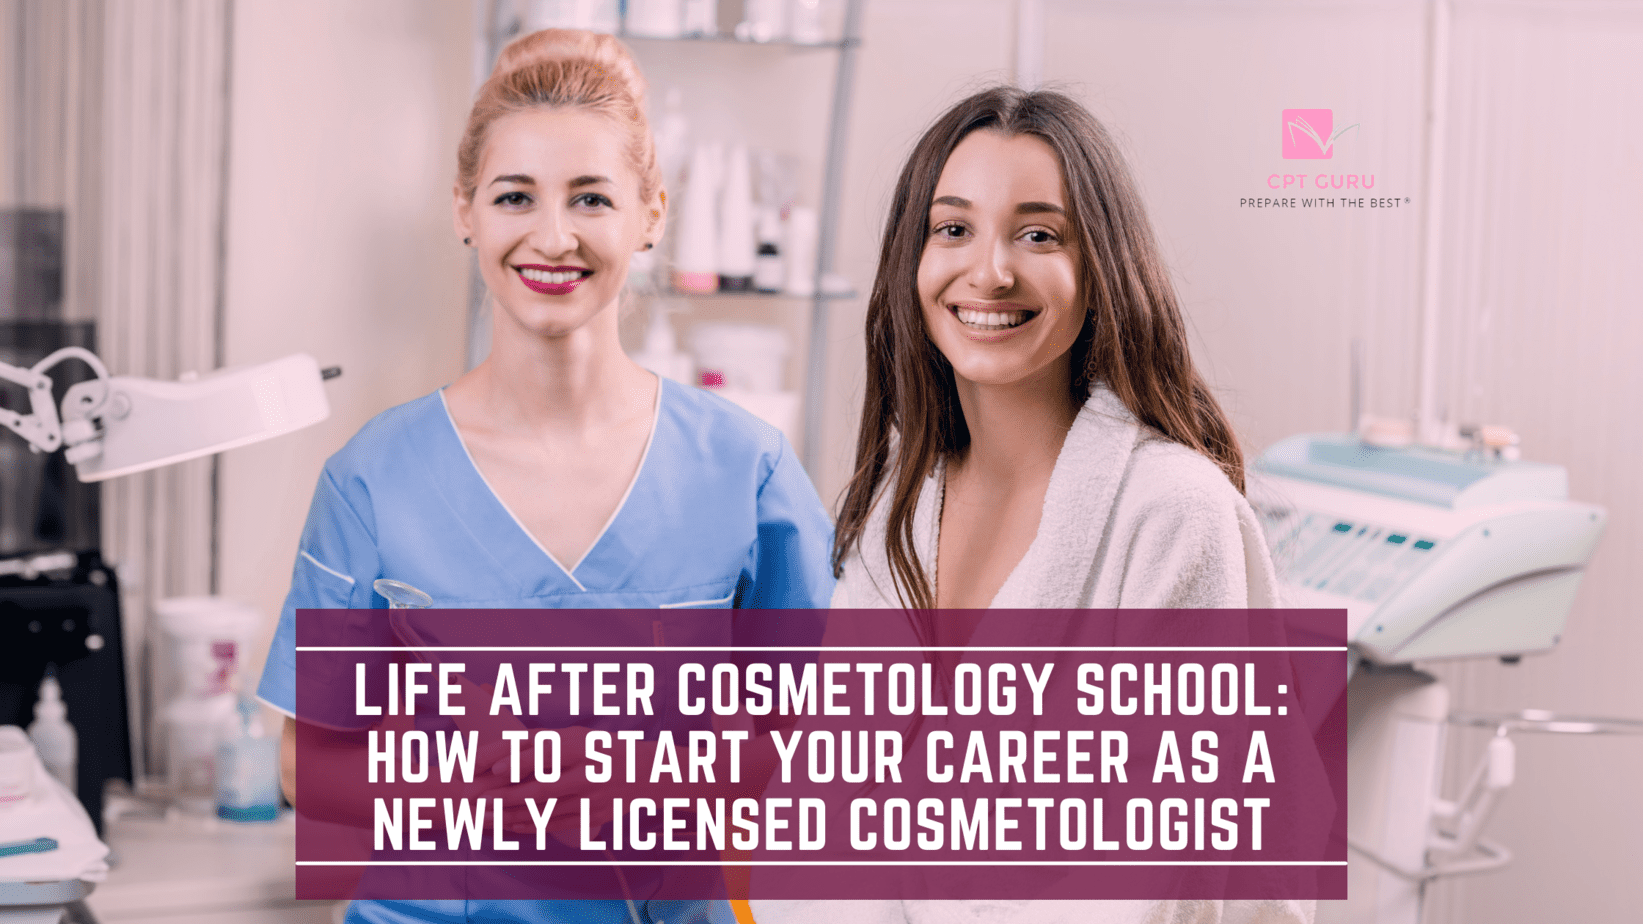 What To Do After Cosmetology School